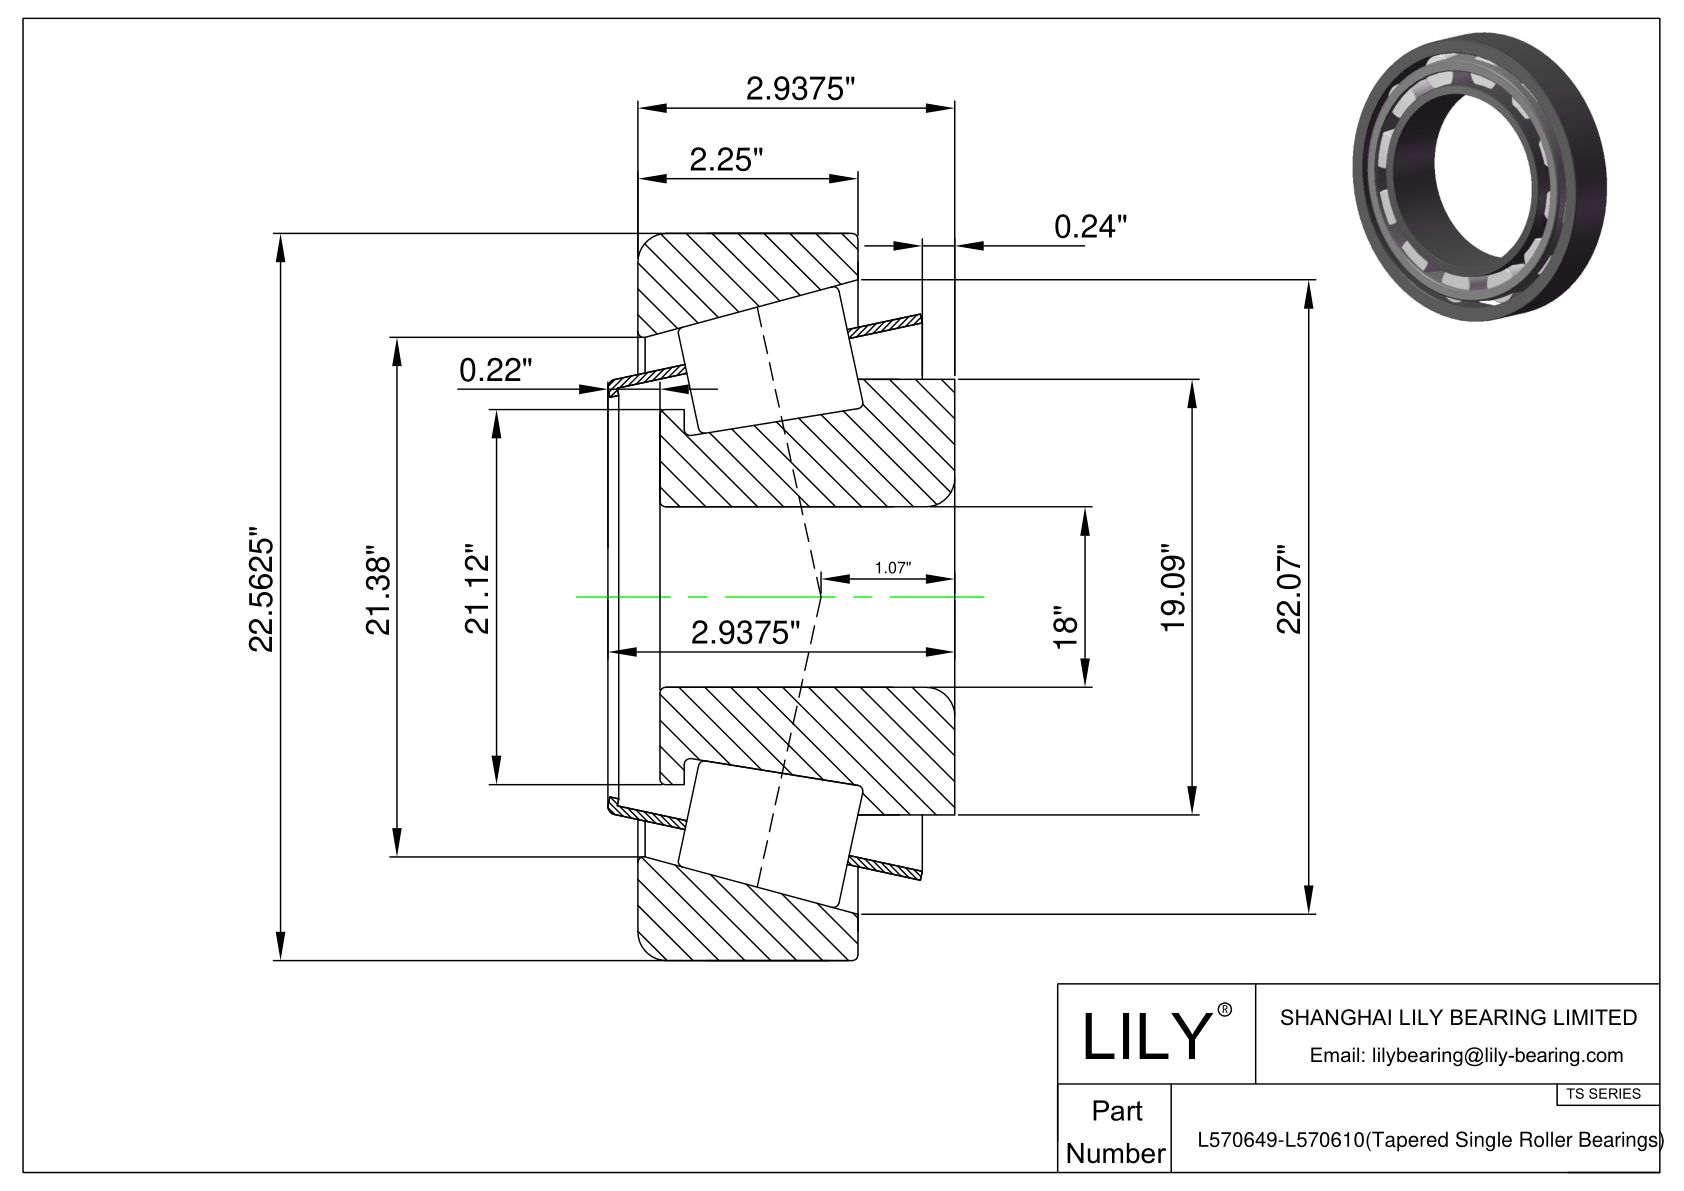 L570649-L570610 TS (Tapered Single Roller Bearings) (Imperial) cad drawing